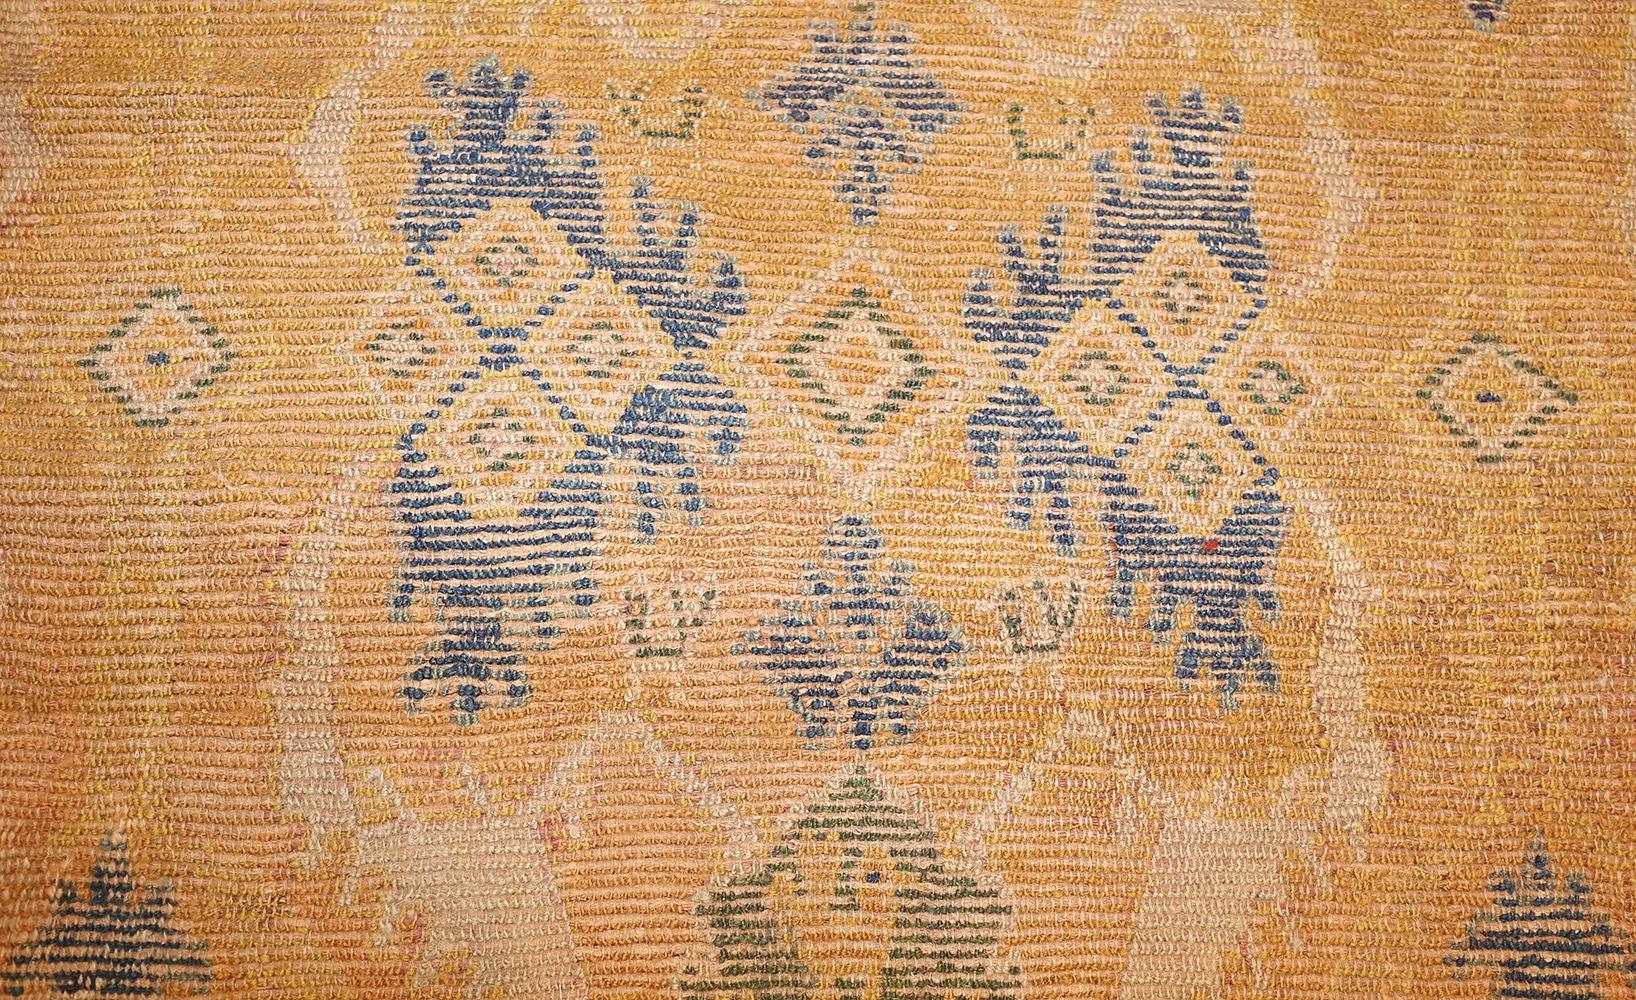 Hand-Knotted Antique 17th Century Spanish Cuenca Carpet. Size: 10' x 11' (3.05 m x 3.35 m)